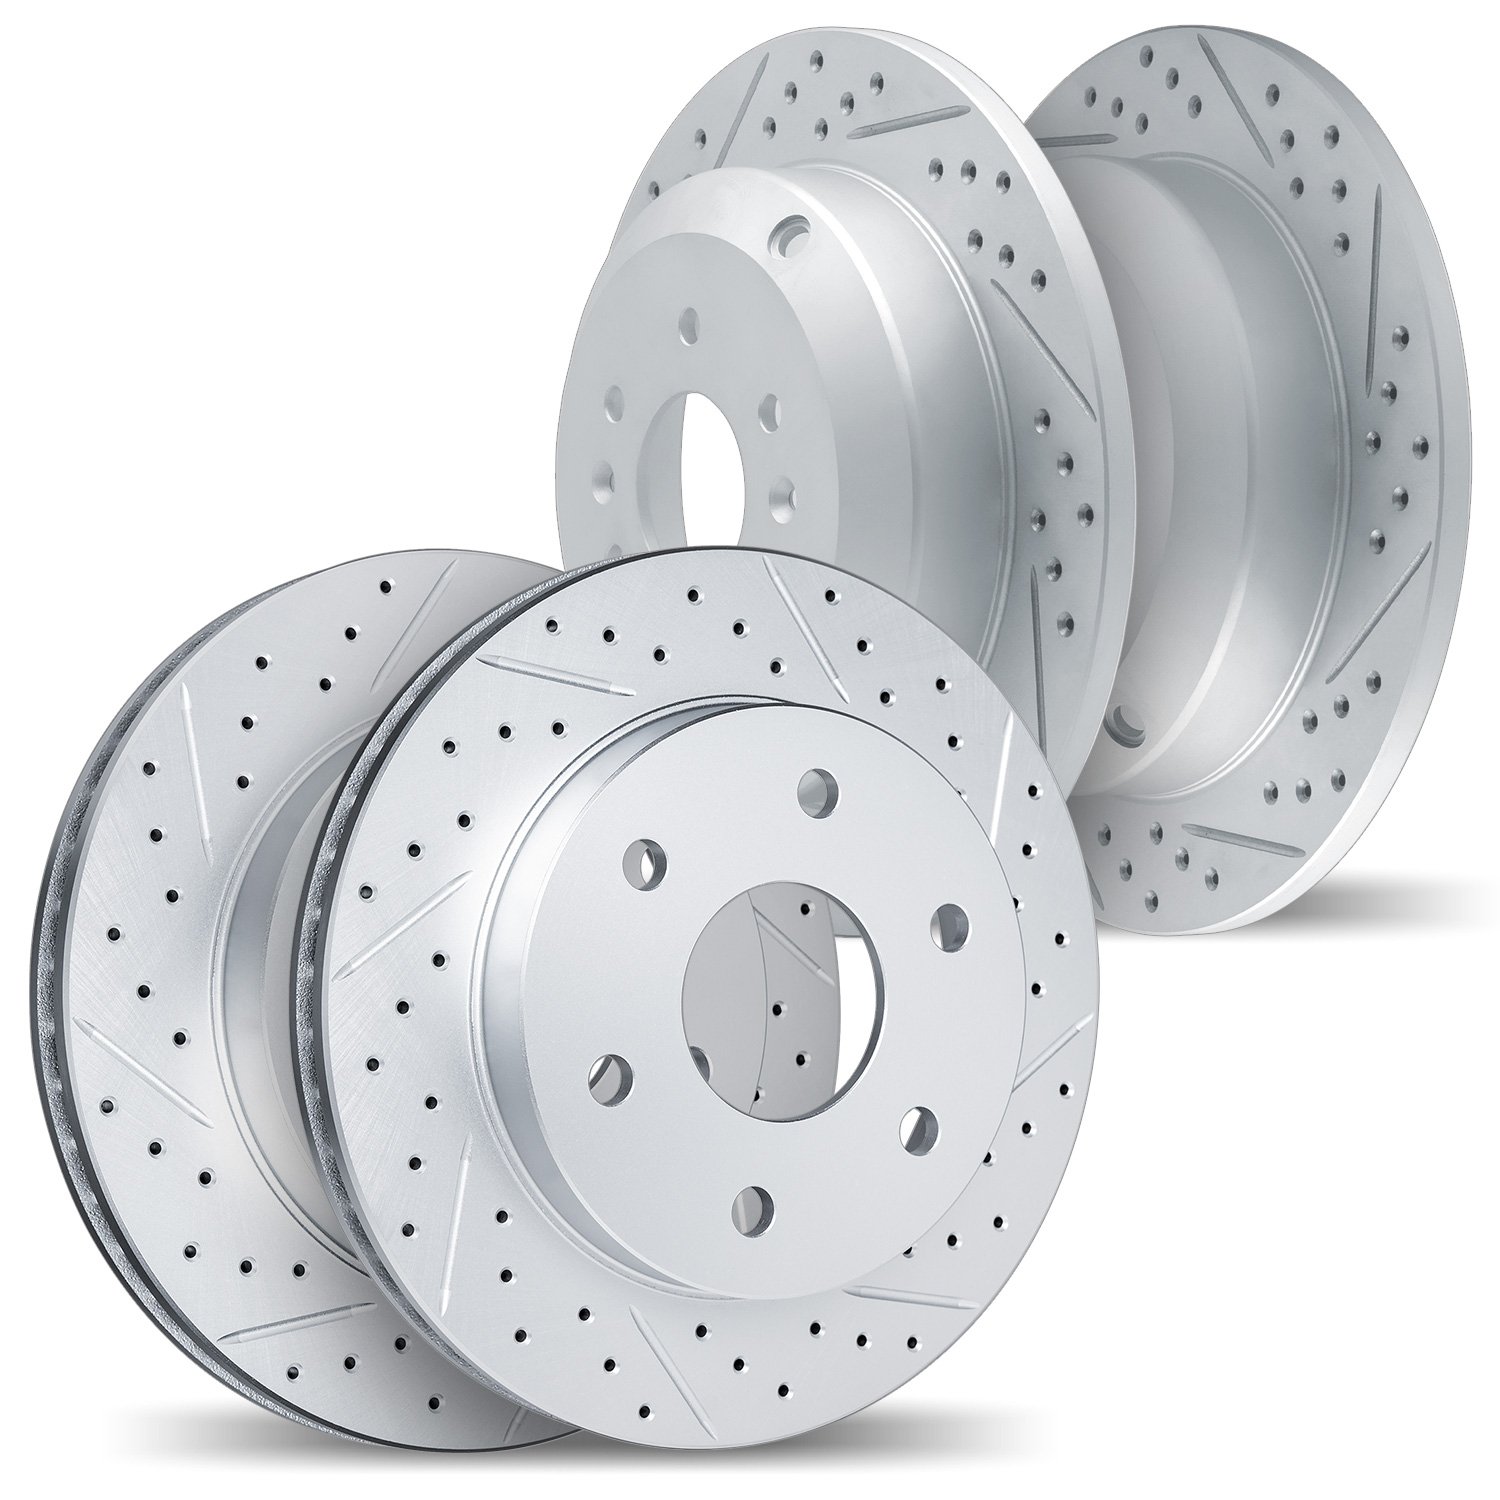 2004-21003 Geoperformance Drilled/Slotted Brake Rotors, 2006-2014 Kia/Hyundai/Genesis, Position: Front and Rear